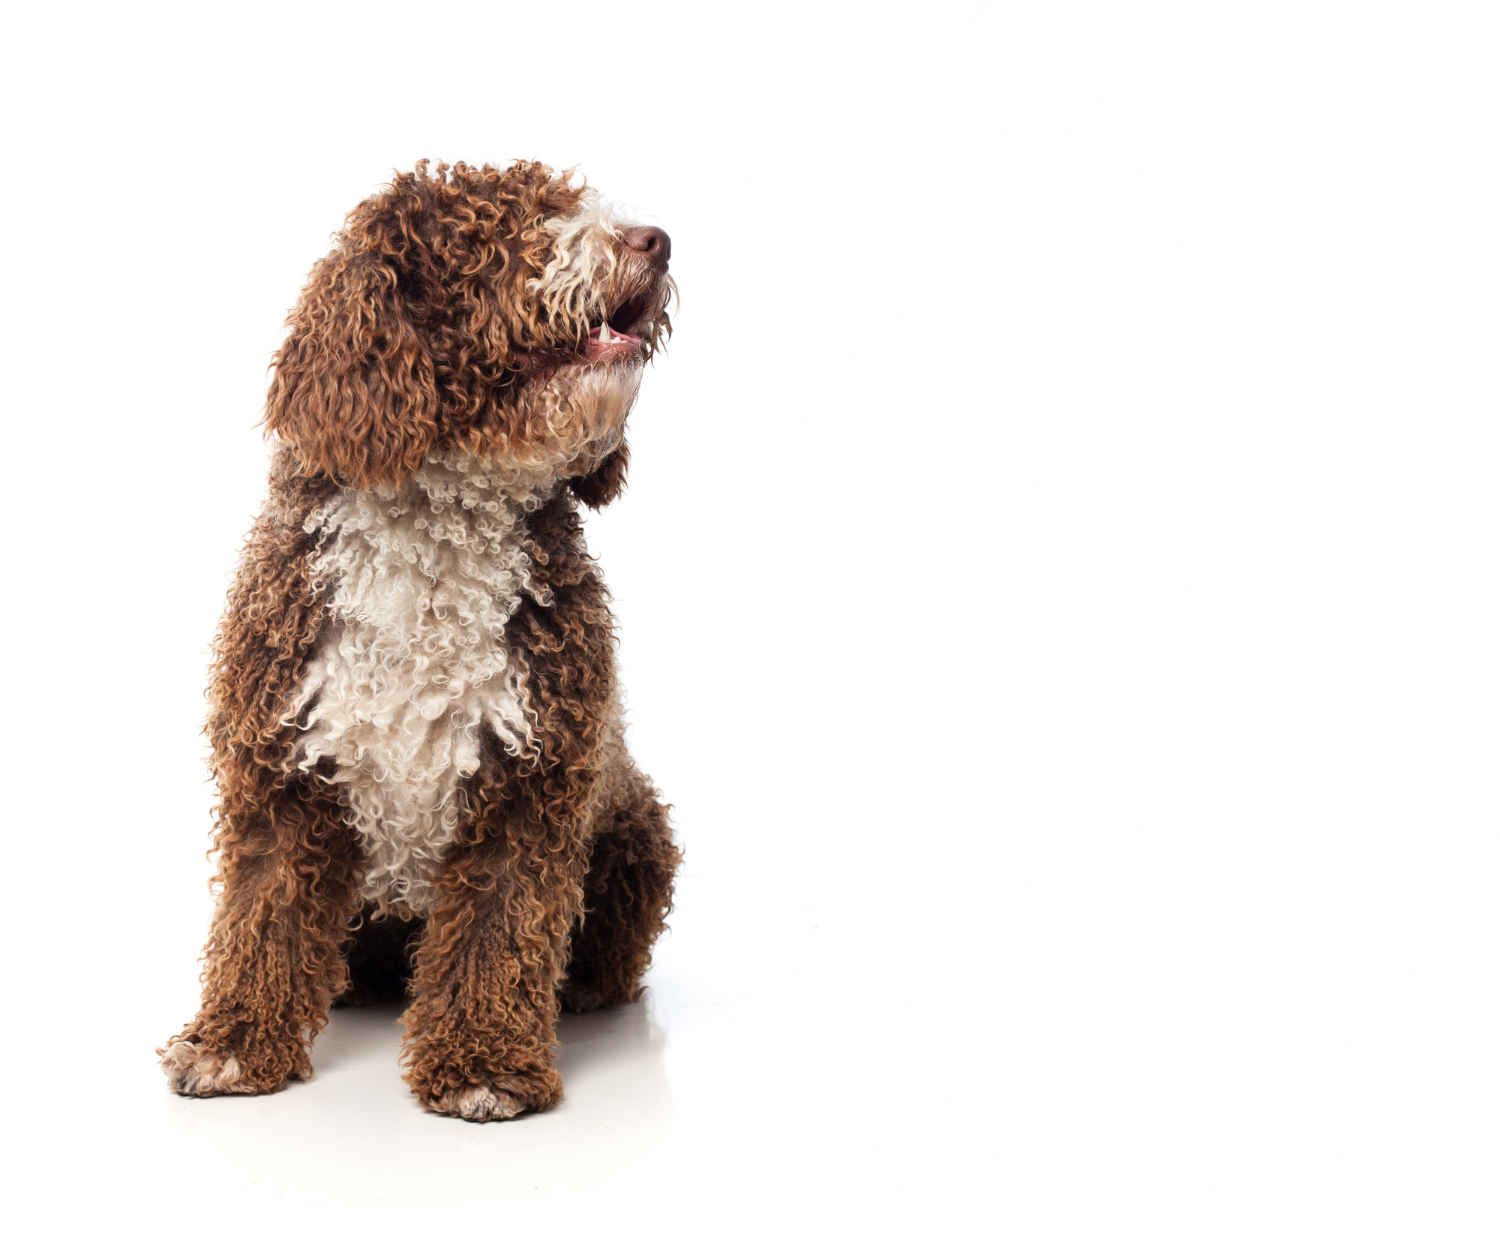 Food Allergies in Dogs: Prevention and Treatment Tips for a Healthy Pup